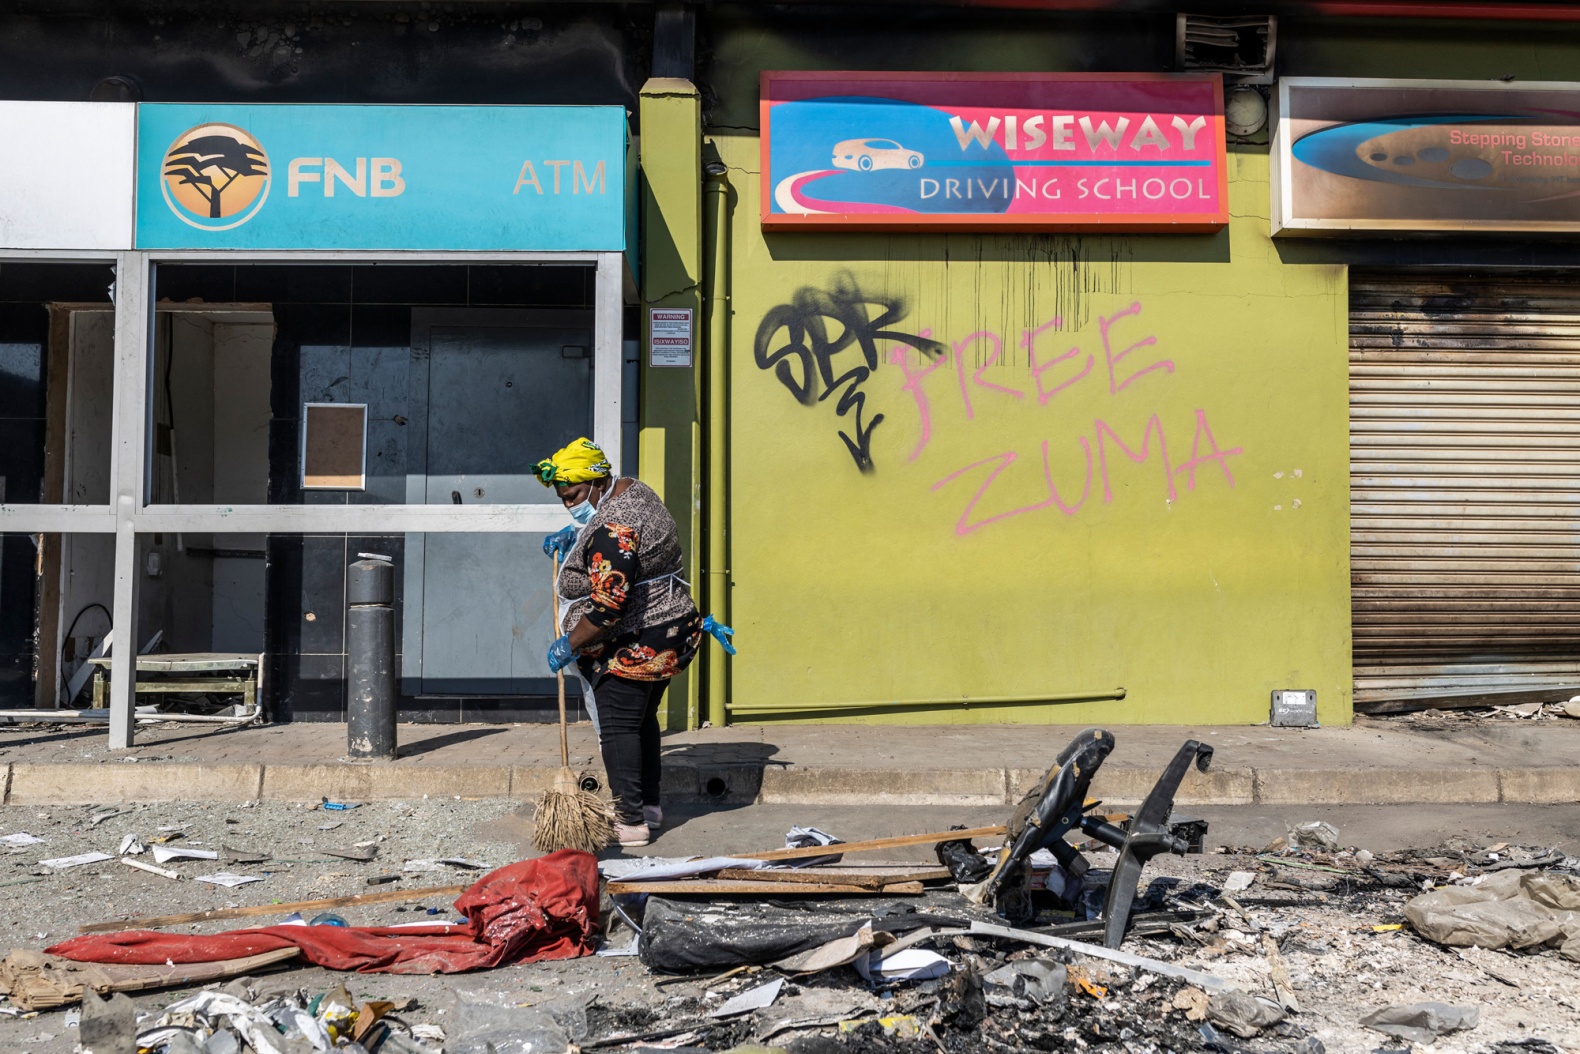 UPDATE: Police Warn of More Mass Robbery Attempts After Looters